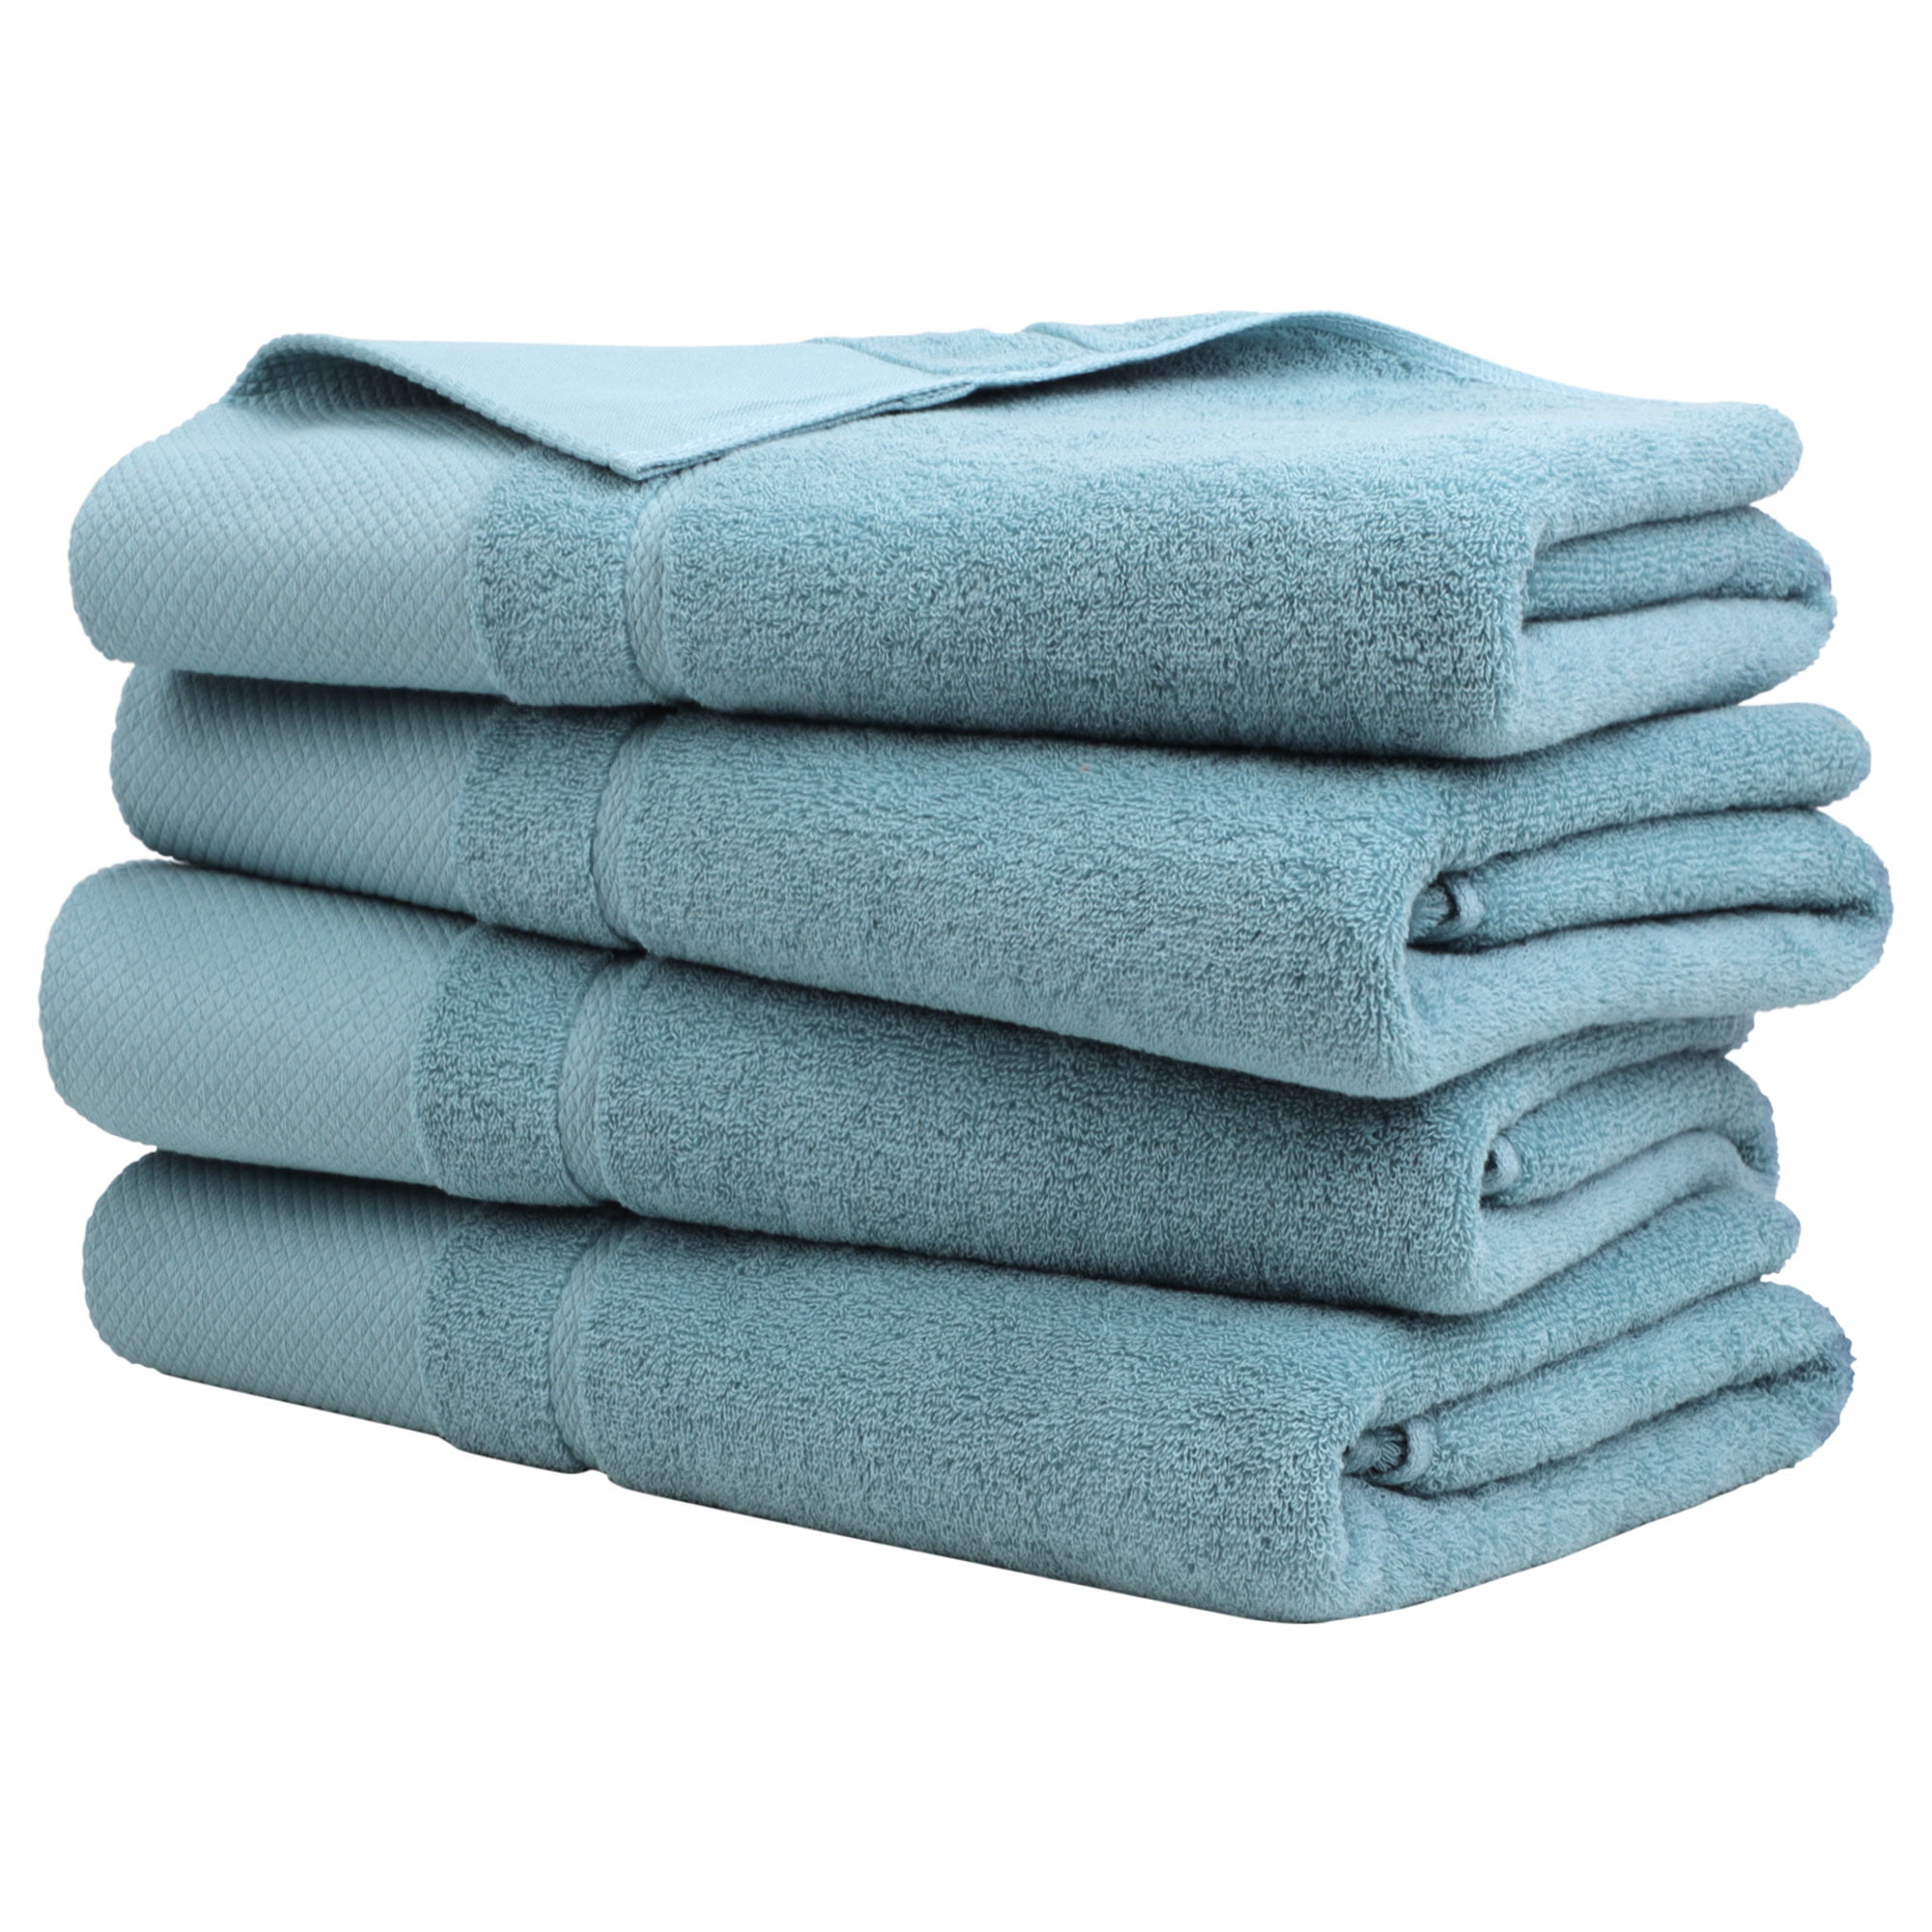 Finest quality Bath Towel-Extra absorbent – Lint free- 27×54